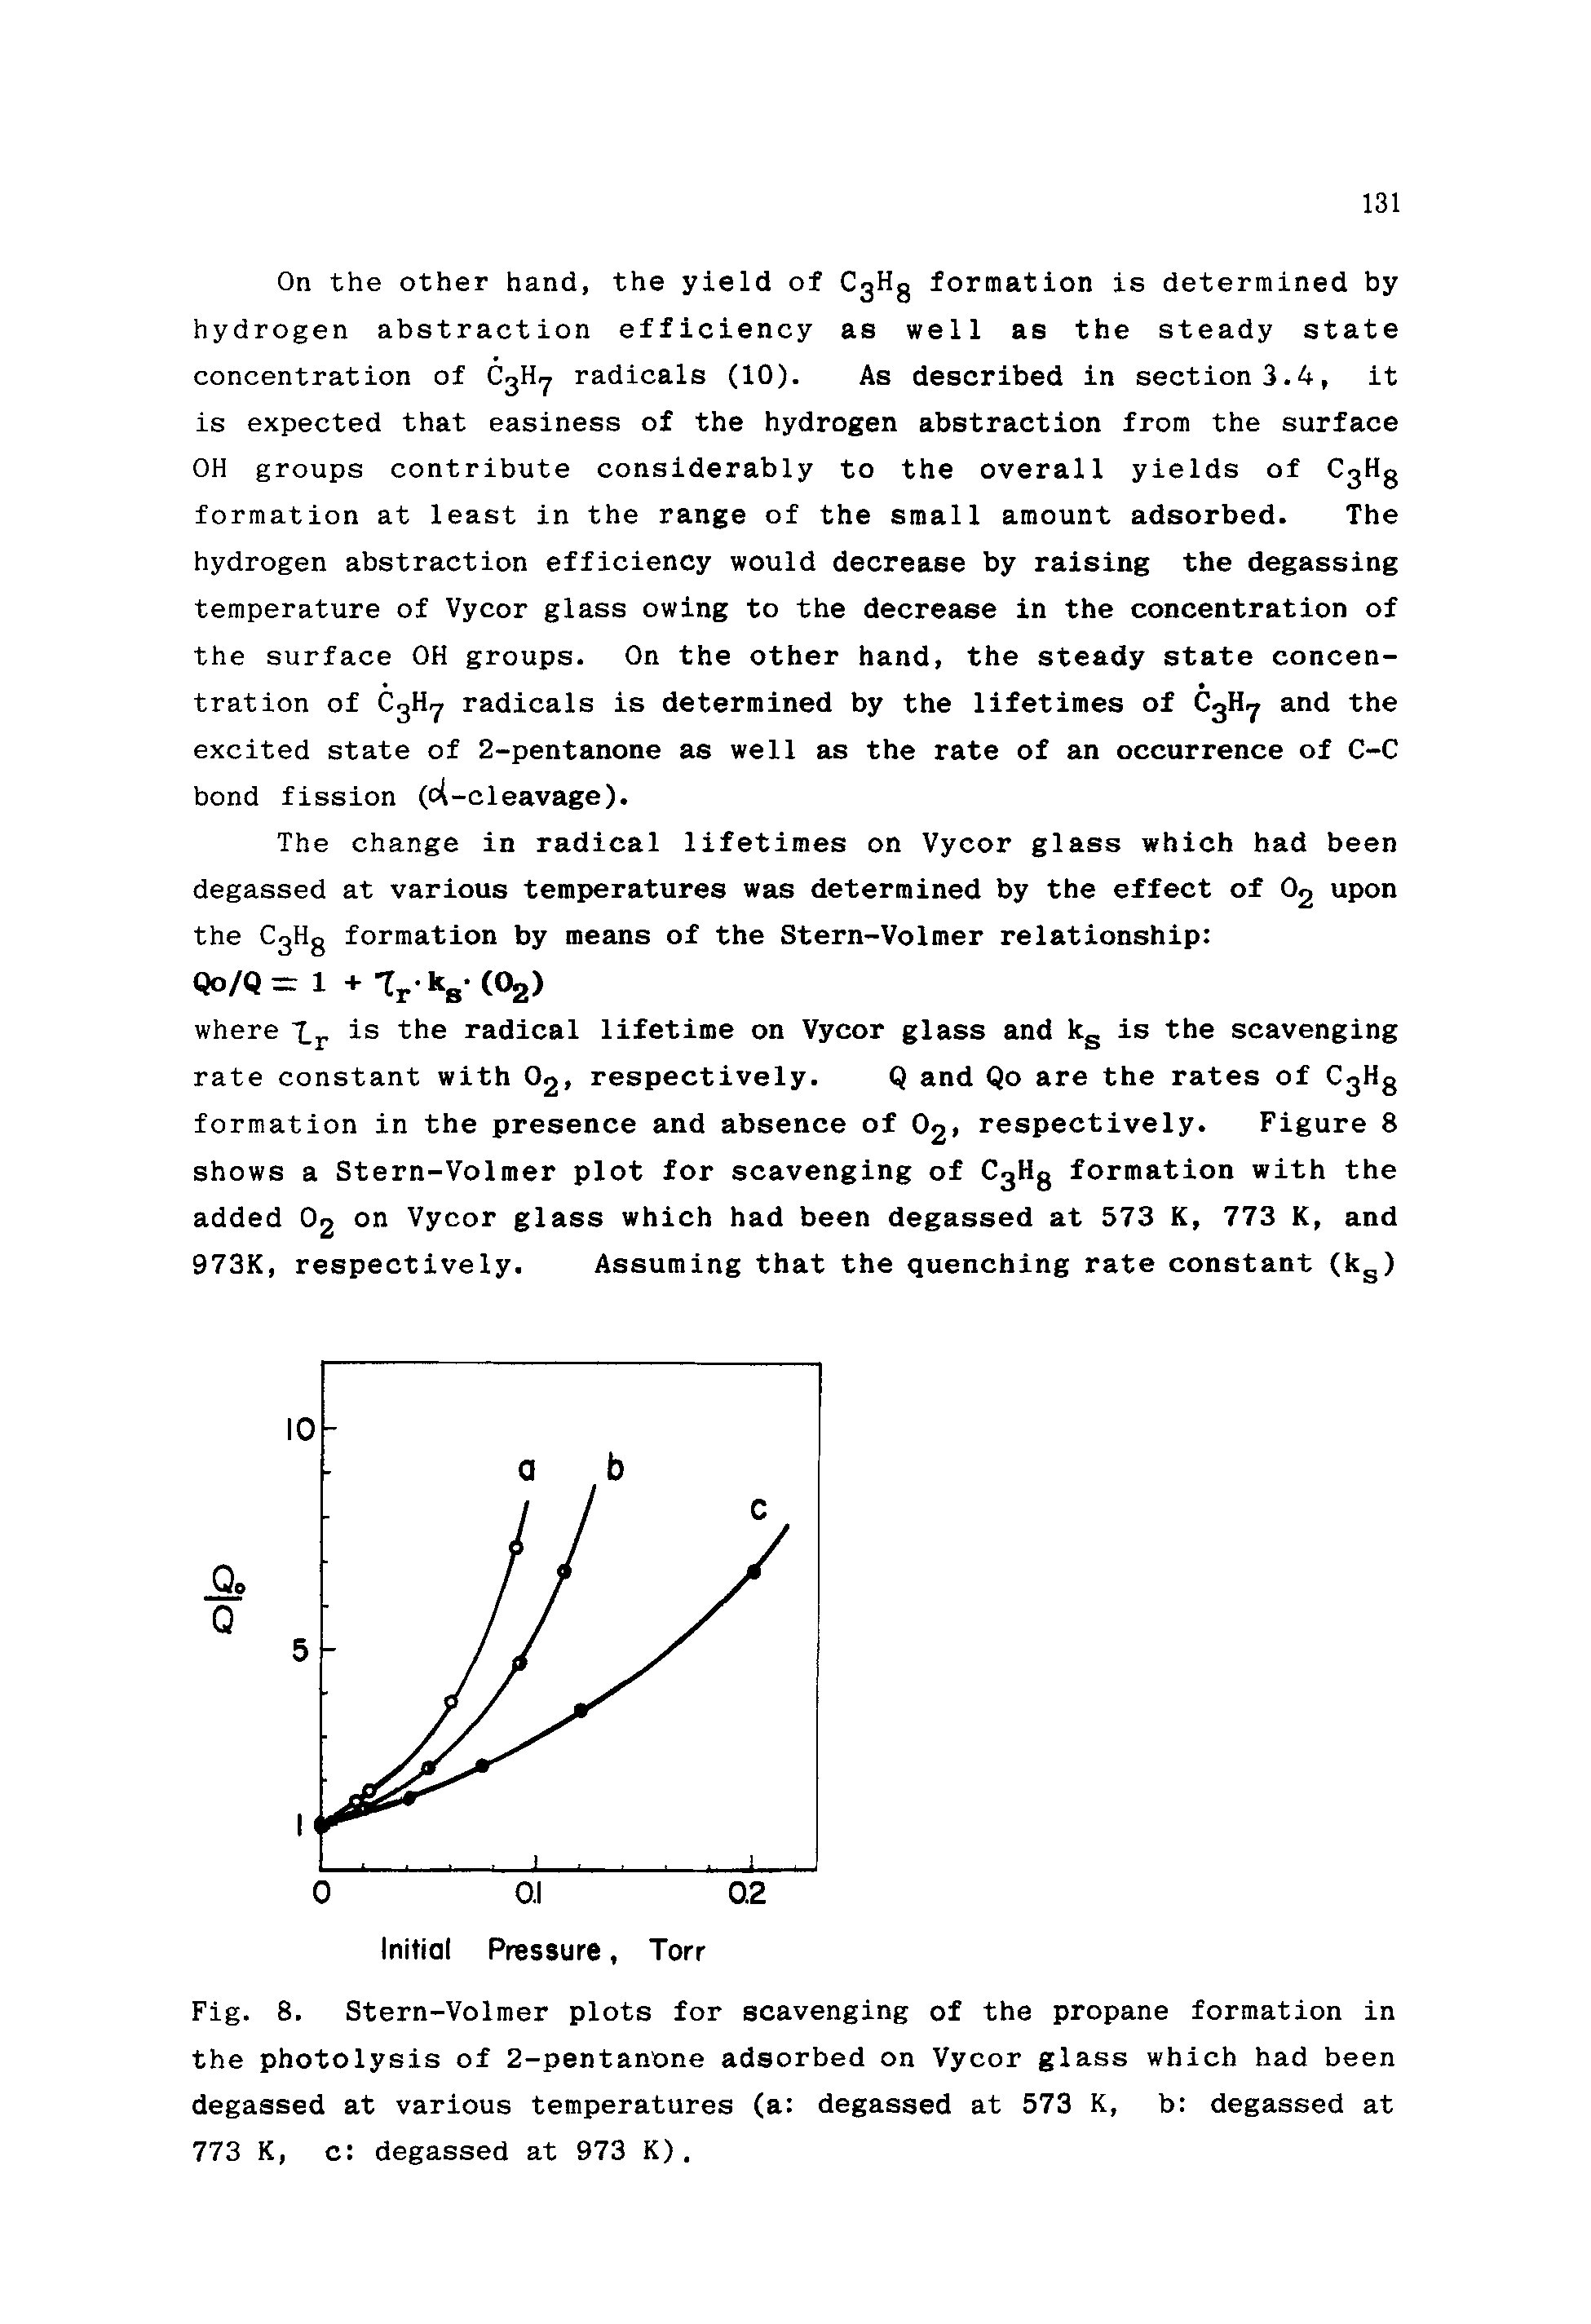 Fig. 8. Stern-Volmer plots for scavenging of the propane formation in the photolysis of 2-pentanone adsorbed on Vycor glass which had been degassed at various temperatures (a degassed at 573 K, b degassed at 773 K, c degassed at 973 K).